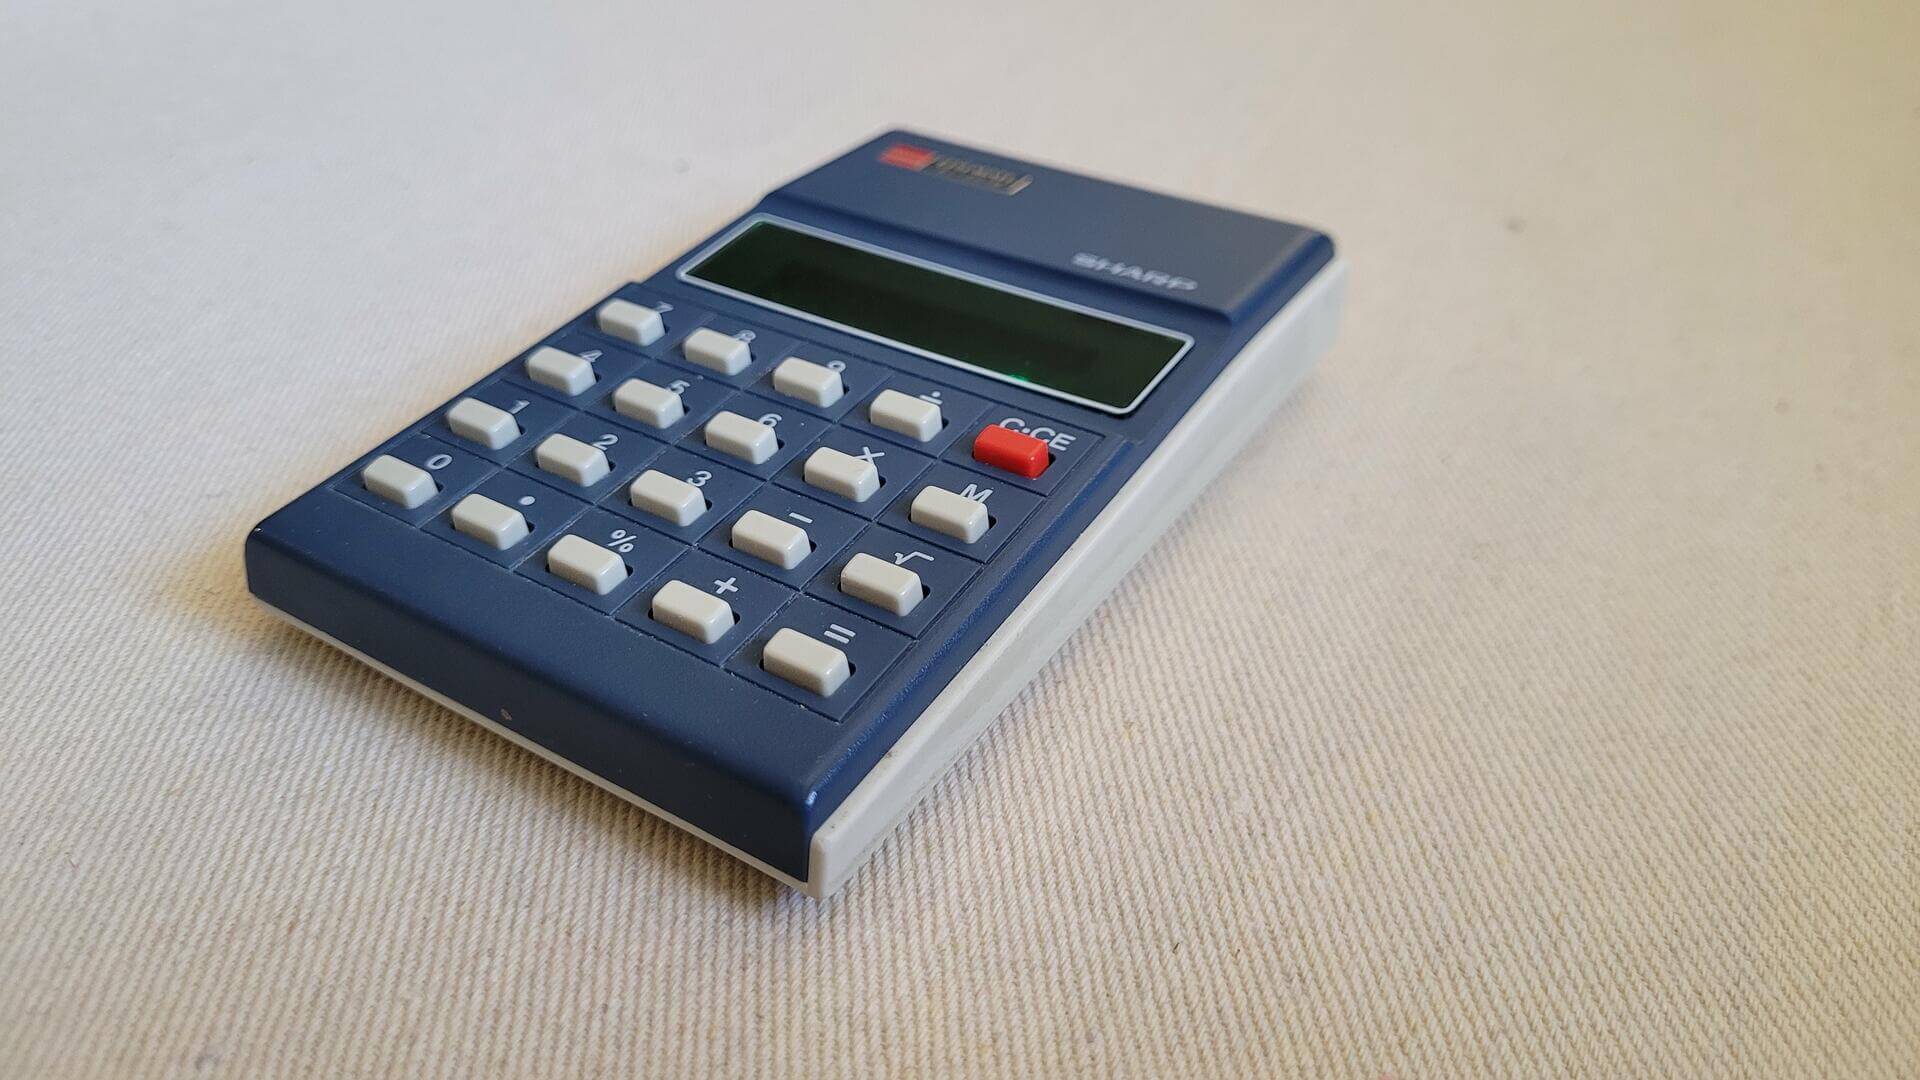 Retro 1970s Sharp Elsi Mate EL-201S arithmetic calculator with 8 digits precision and algebraic logic. It has 6 functions, 20 keys, and a VFD (vacuum fluorescent) display. The power source is 2xAA. Vintage made in Japan collectible electronic and scientific tools and equipment.